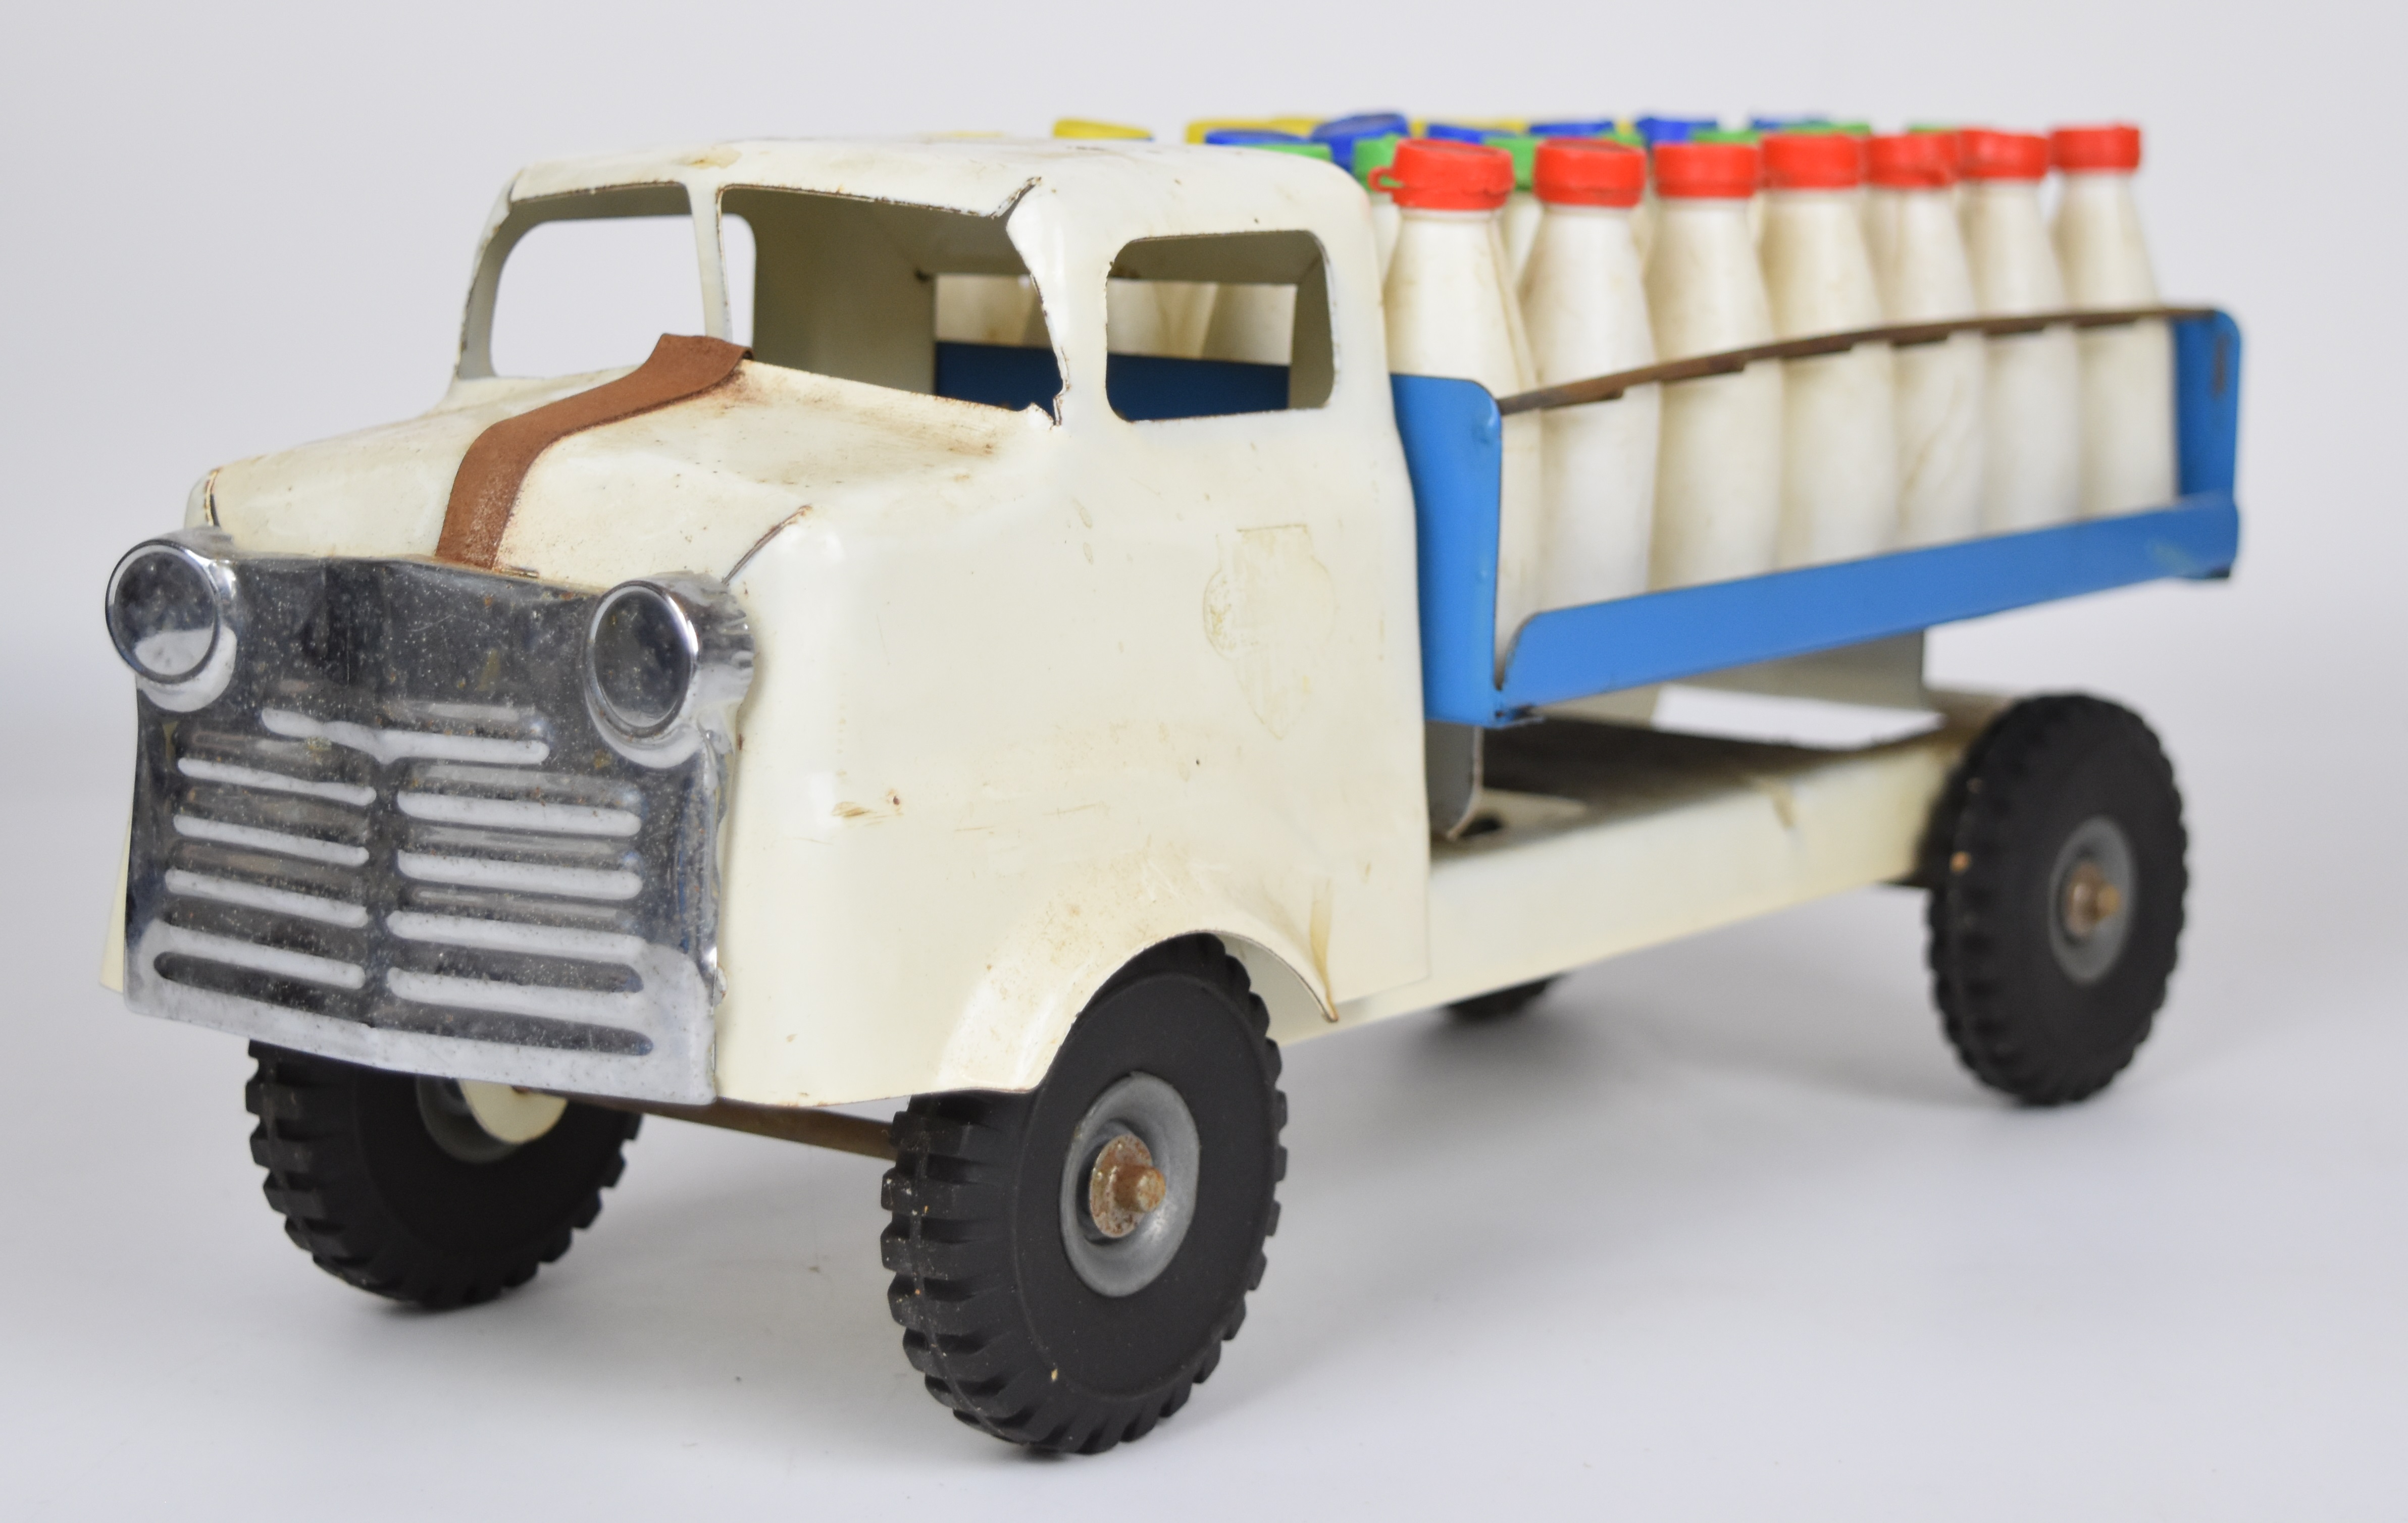 Tri-ang pressed steel milk truck or float with white cab and blue bed, complete with milk bottles. - Image 2 of 4